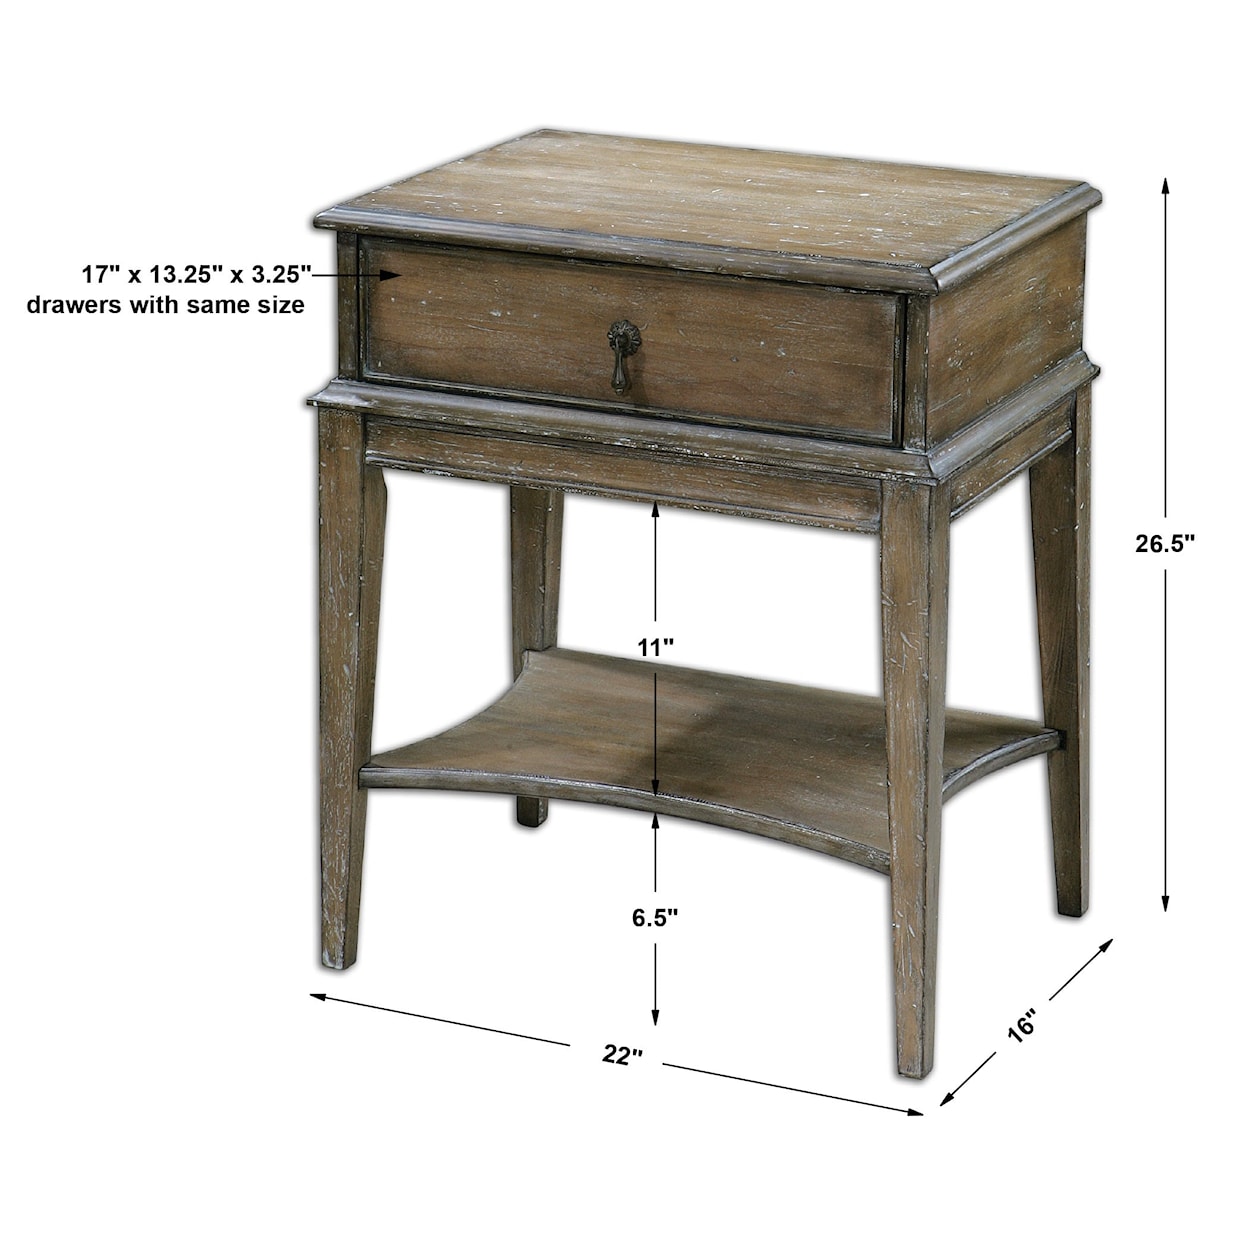 Uttermost Accent Furniture - Occasional Tables Hanford Weathered Accent Table